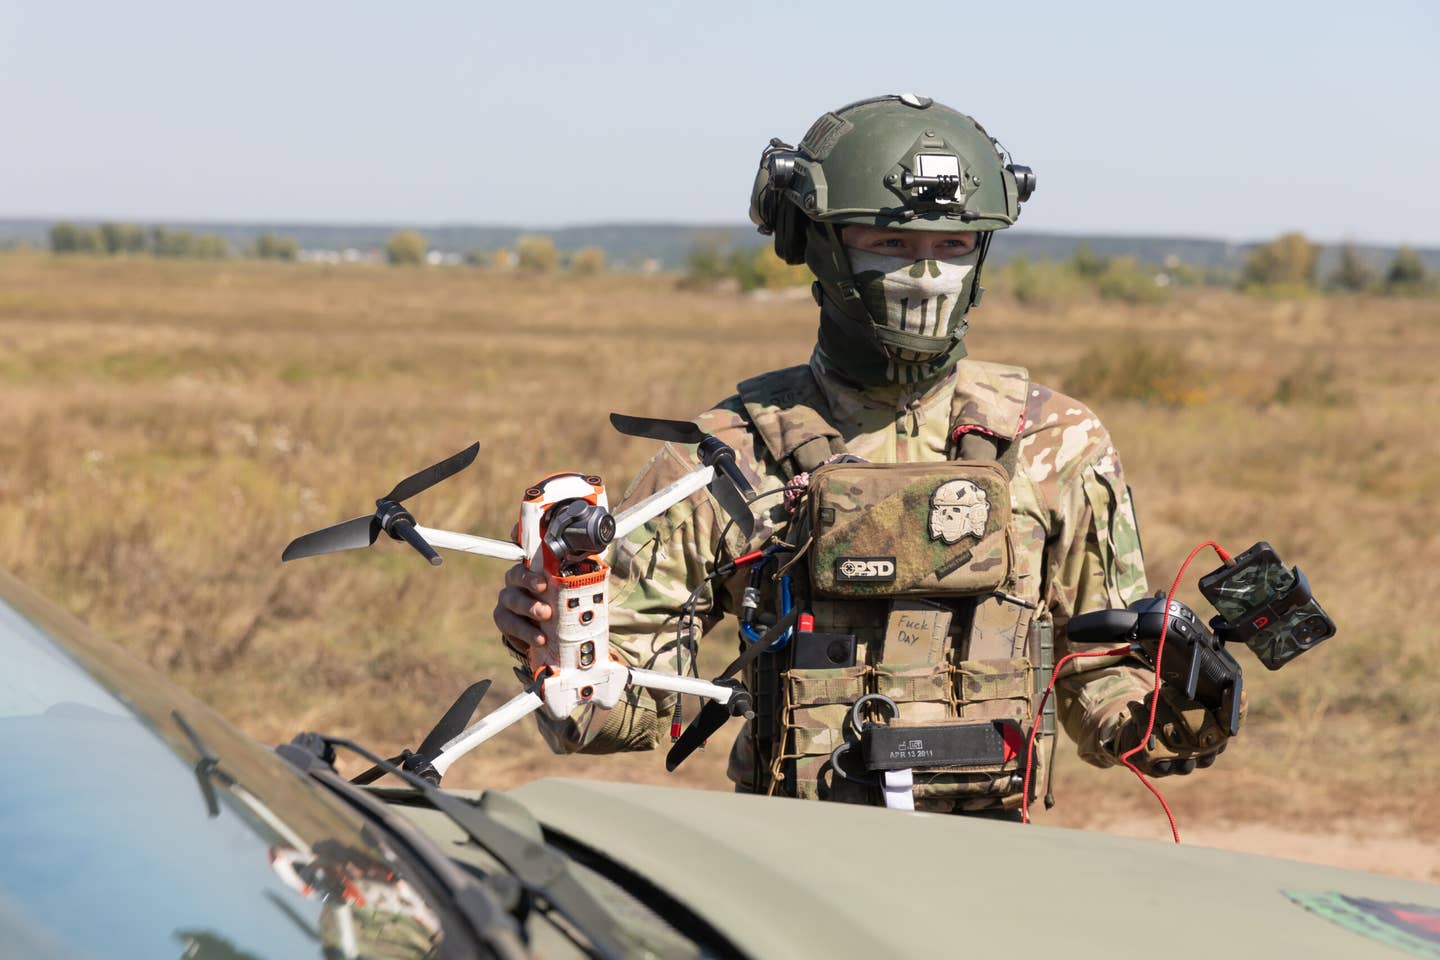 A drone operator from the field medicine division Hospitallers is seen preparing to launch a quadrocopter to search for the wounded on the battlefield. (Photo by Mykhaylo Palinchak/SOPA Images/LightRocket via Getty Images)